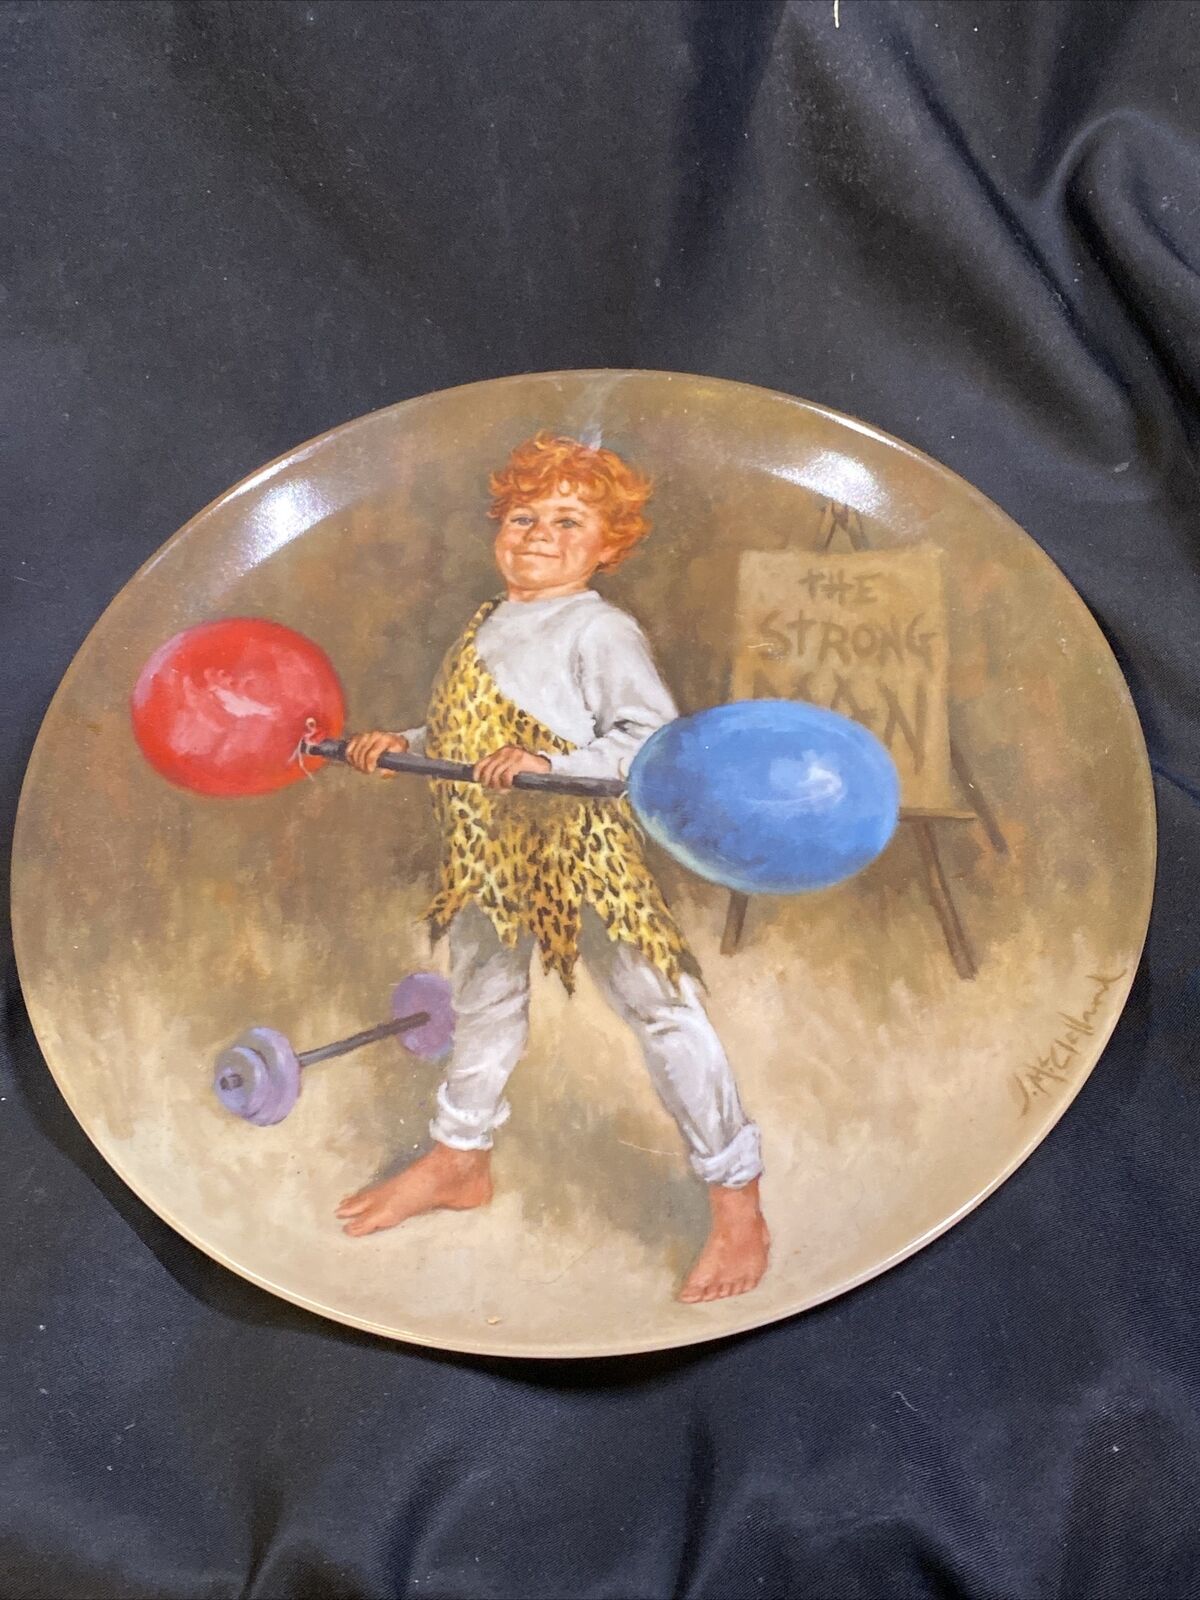 Reco 1983 Johnny The Strong Man McClelland Children\'s Circus Collection Plate